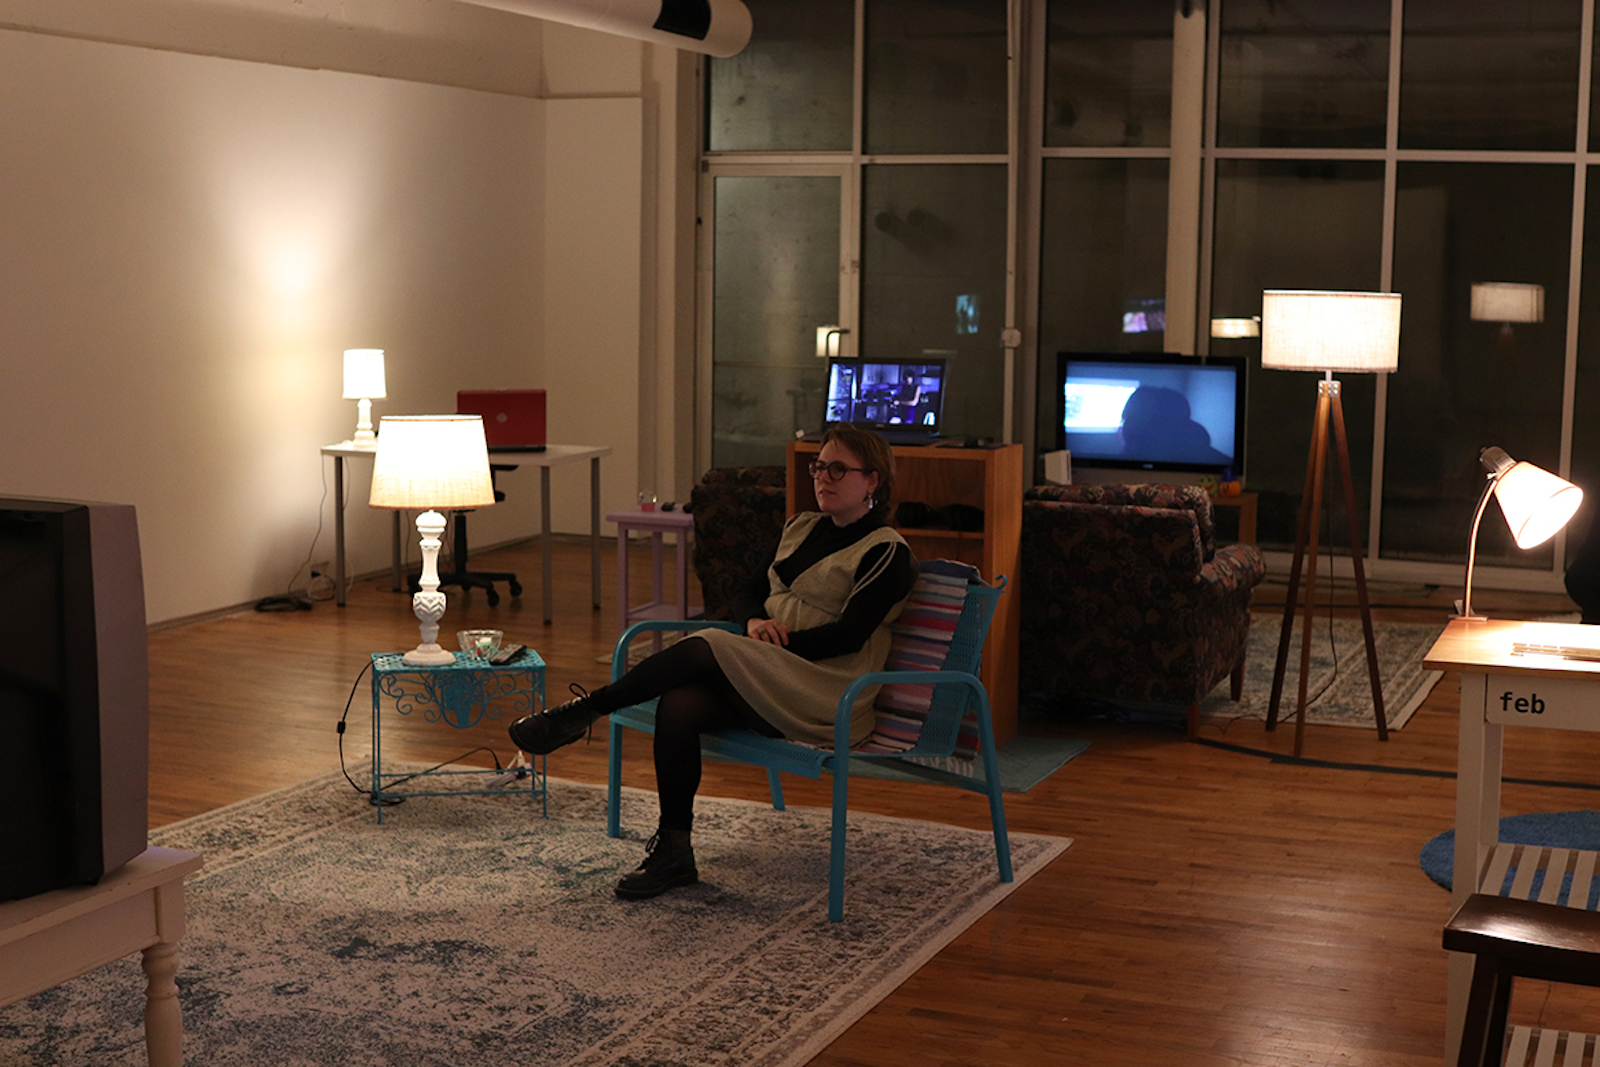 A woman sitting in a chair watching a tv, and you can see two other tvs in the background behind her